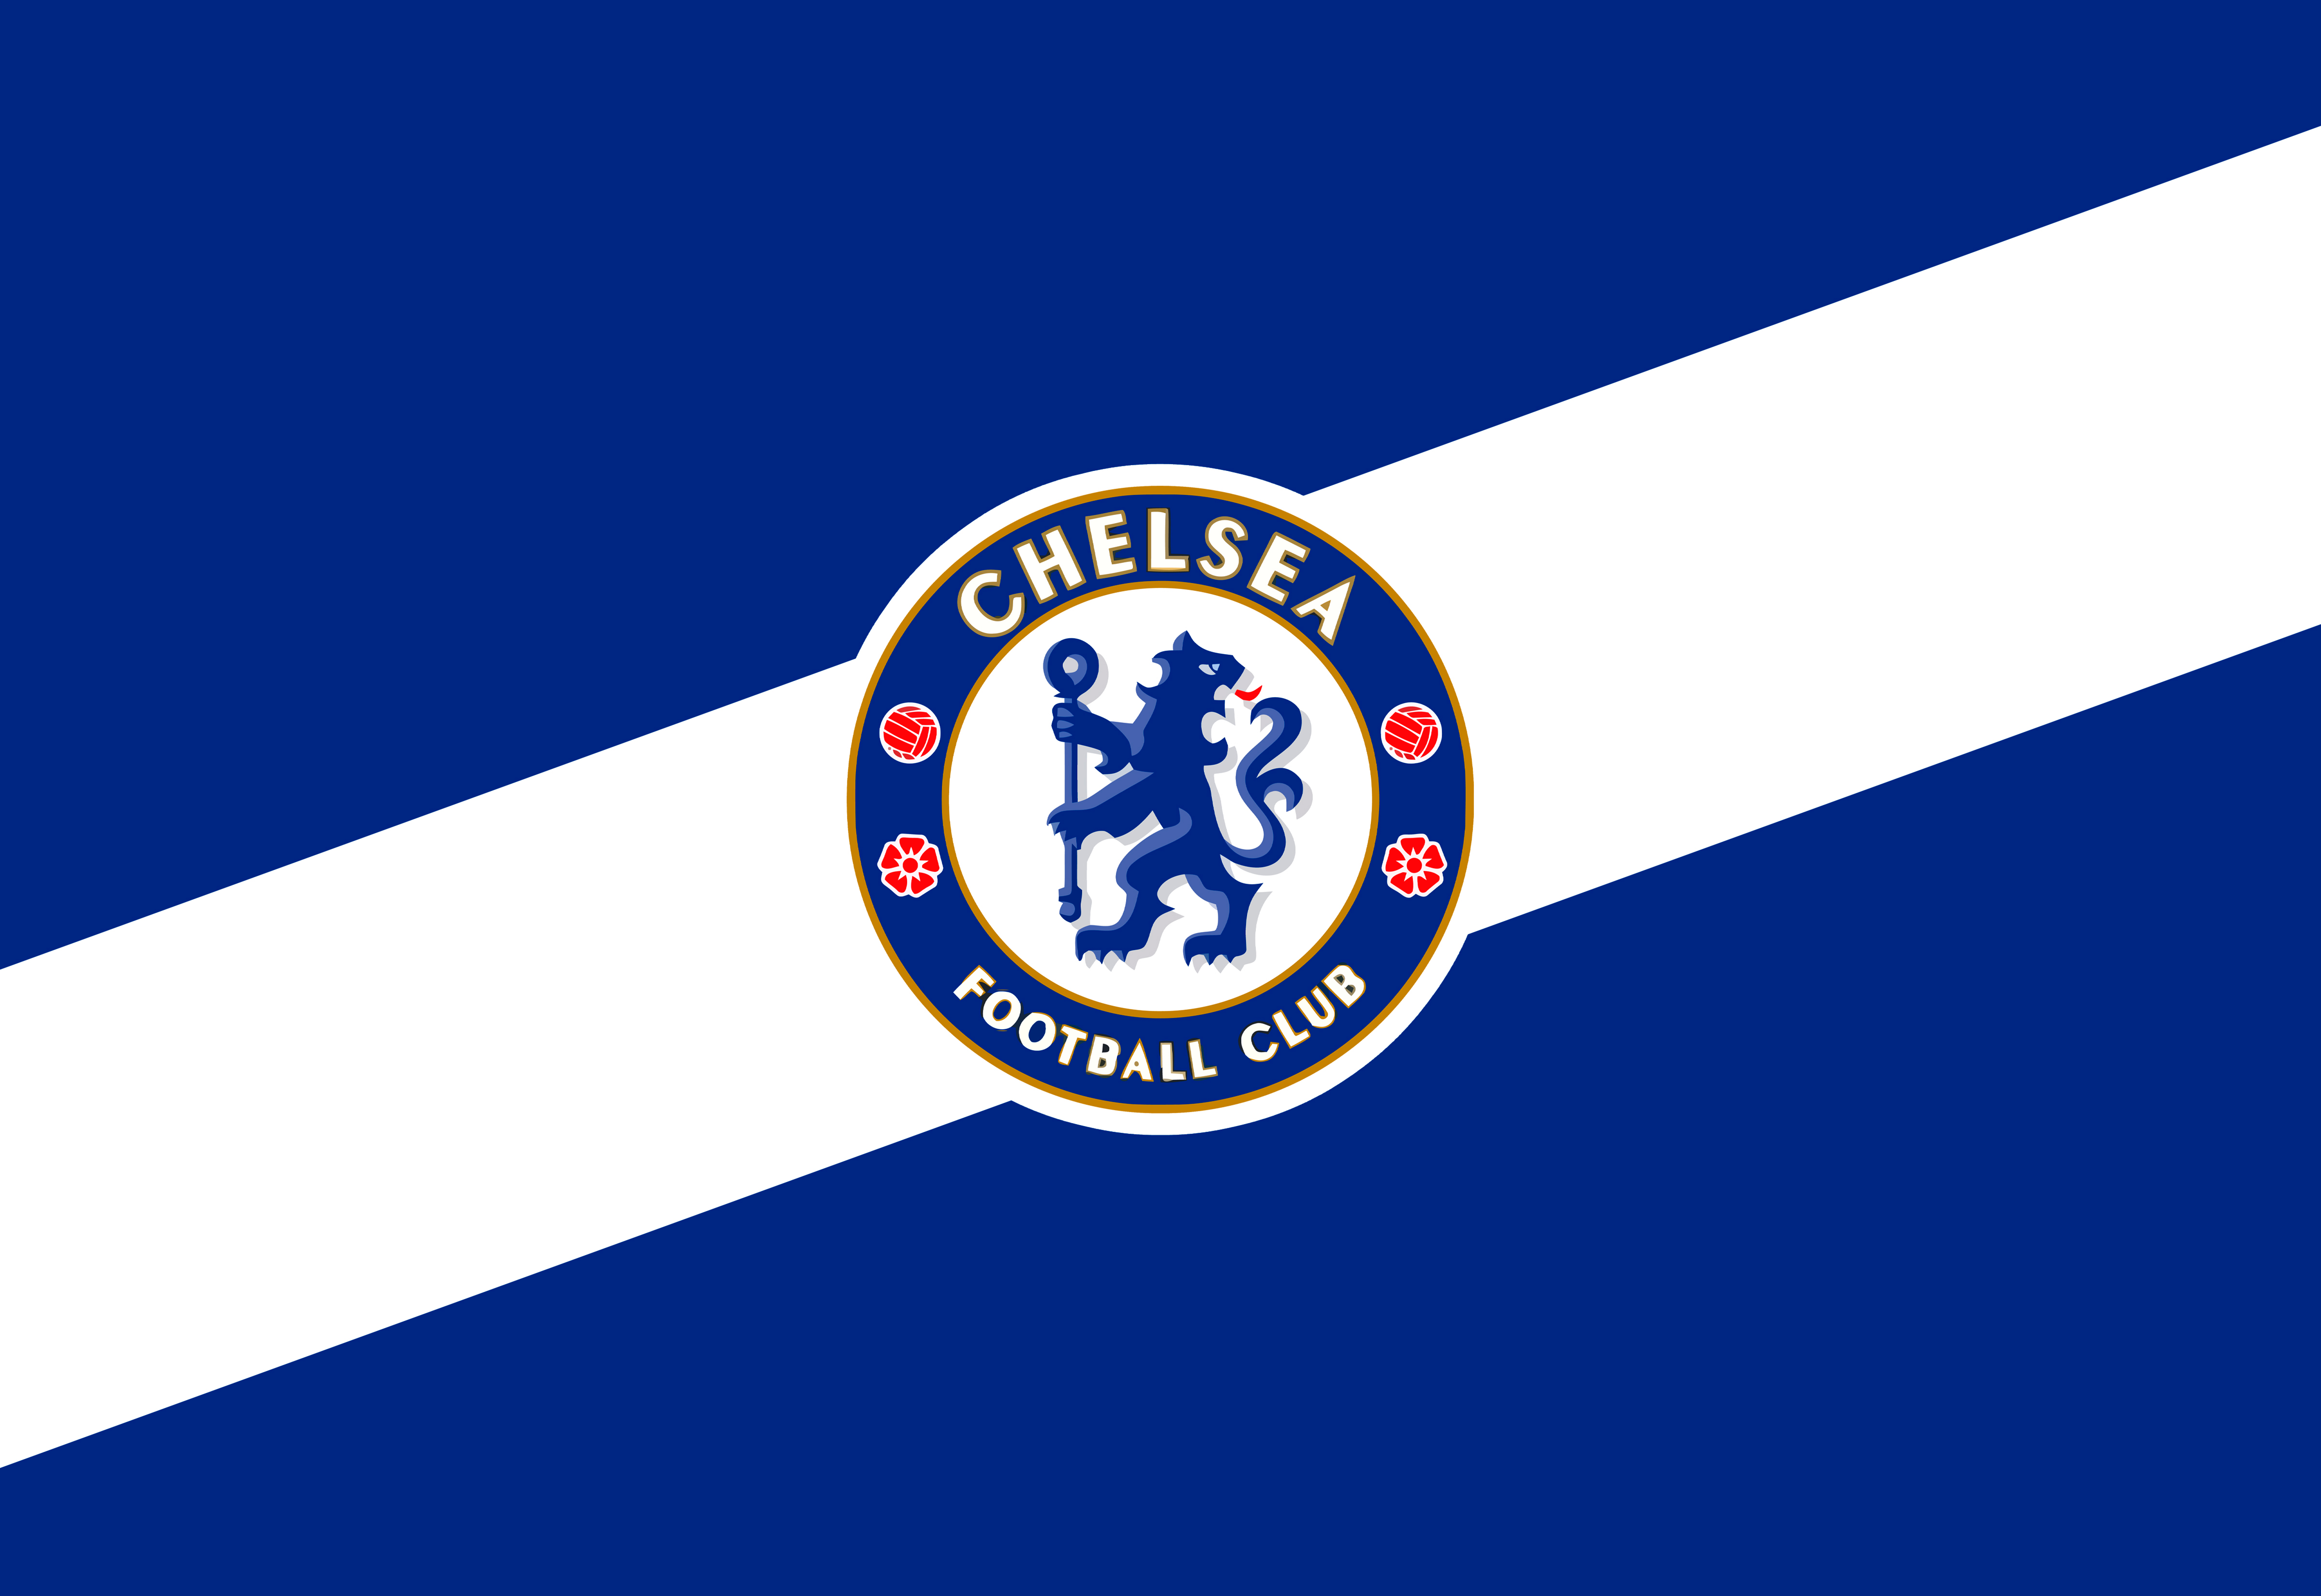 3502x1886 chelsea fc wallpaper - Coolwallpapers.me!